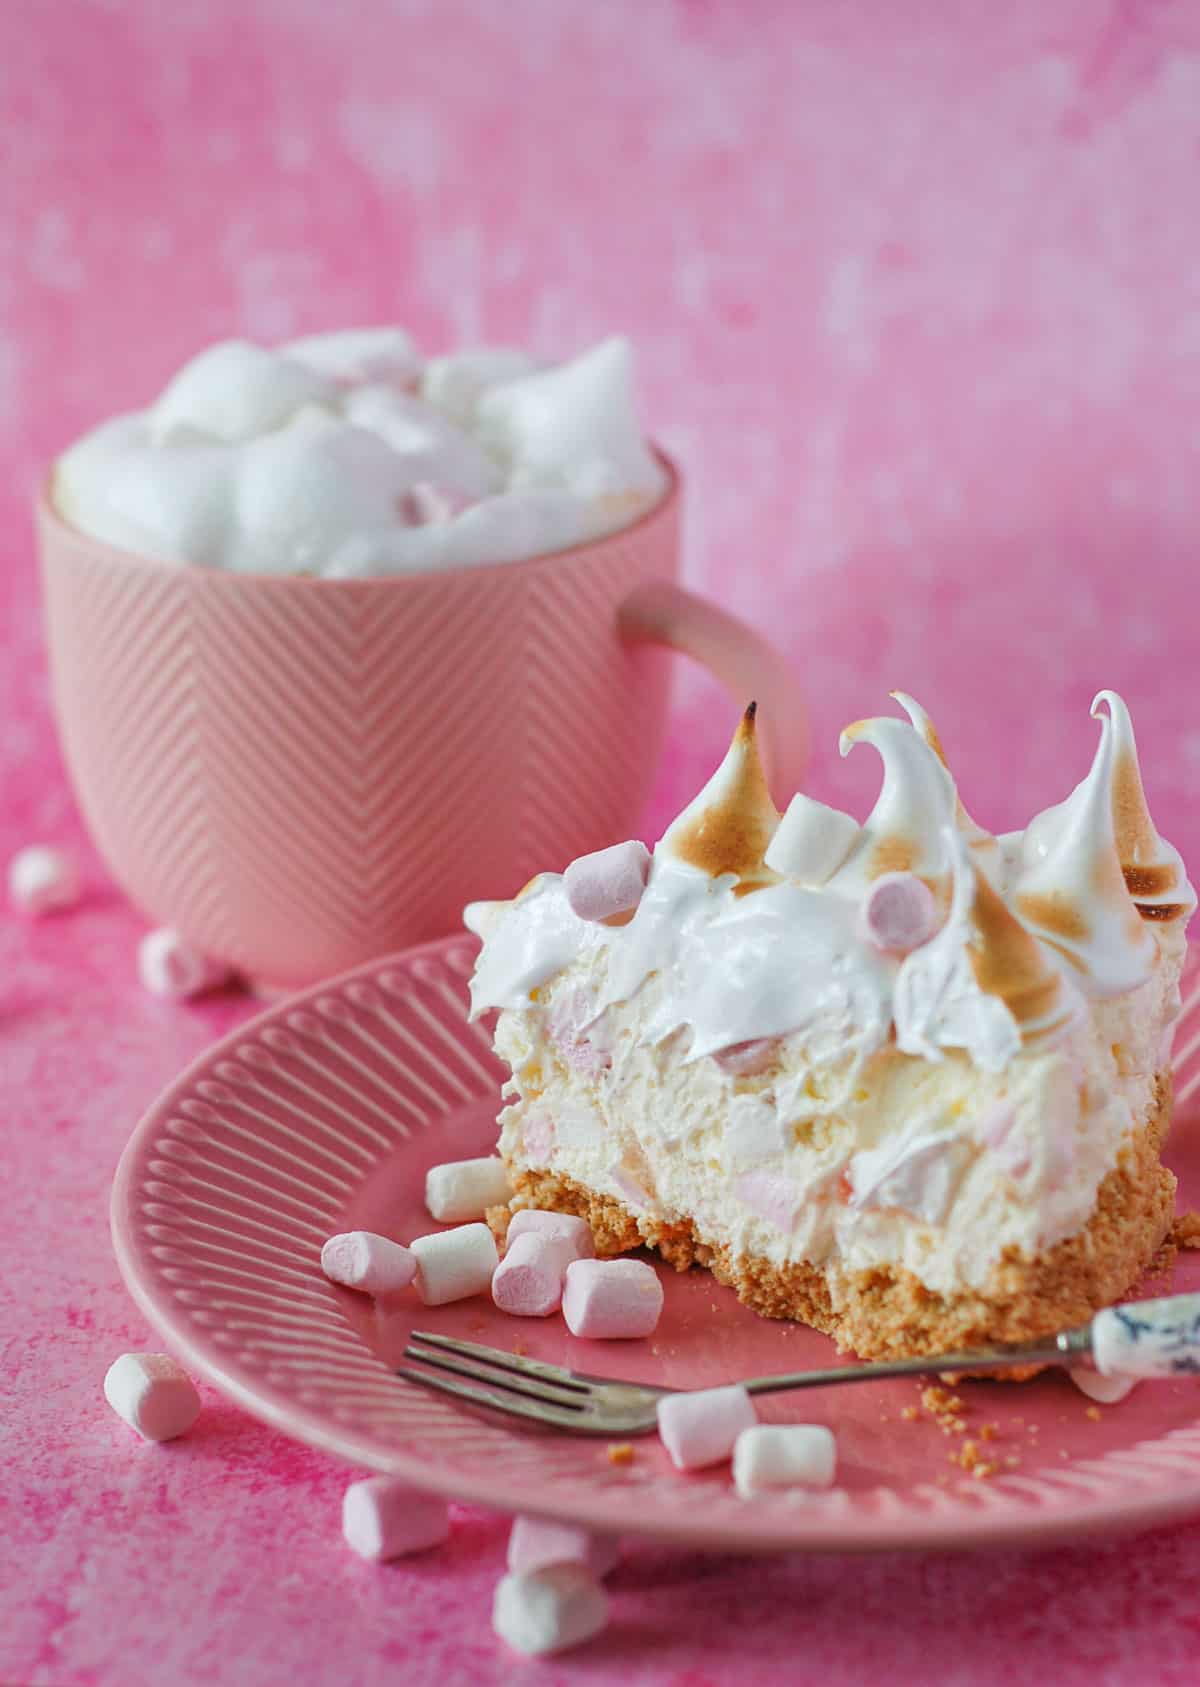 A slice of marshmallow tart on a pink plate with a mug of coffee in the background